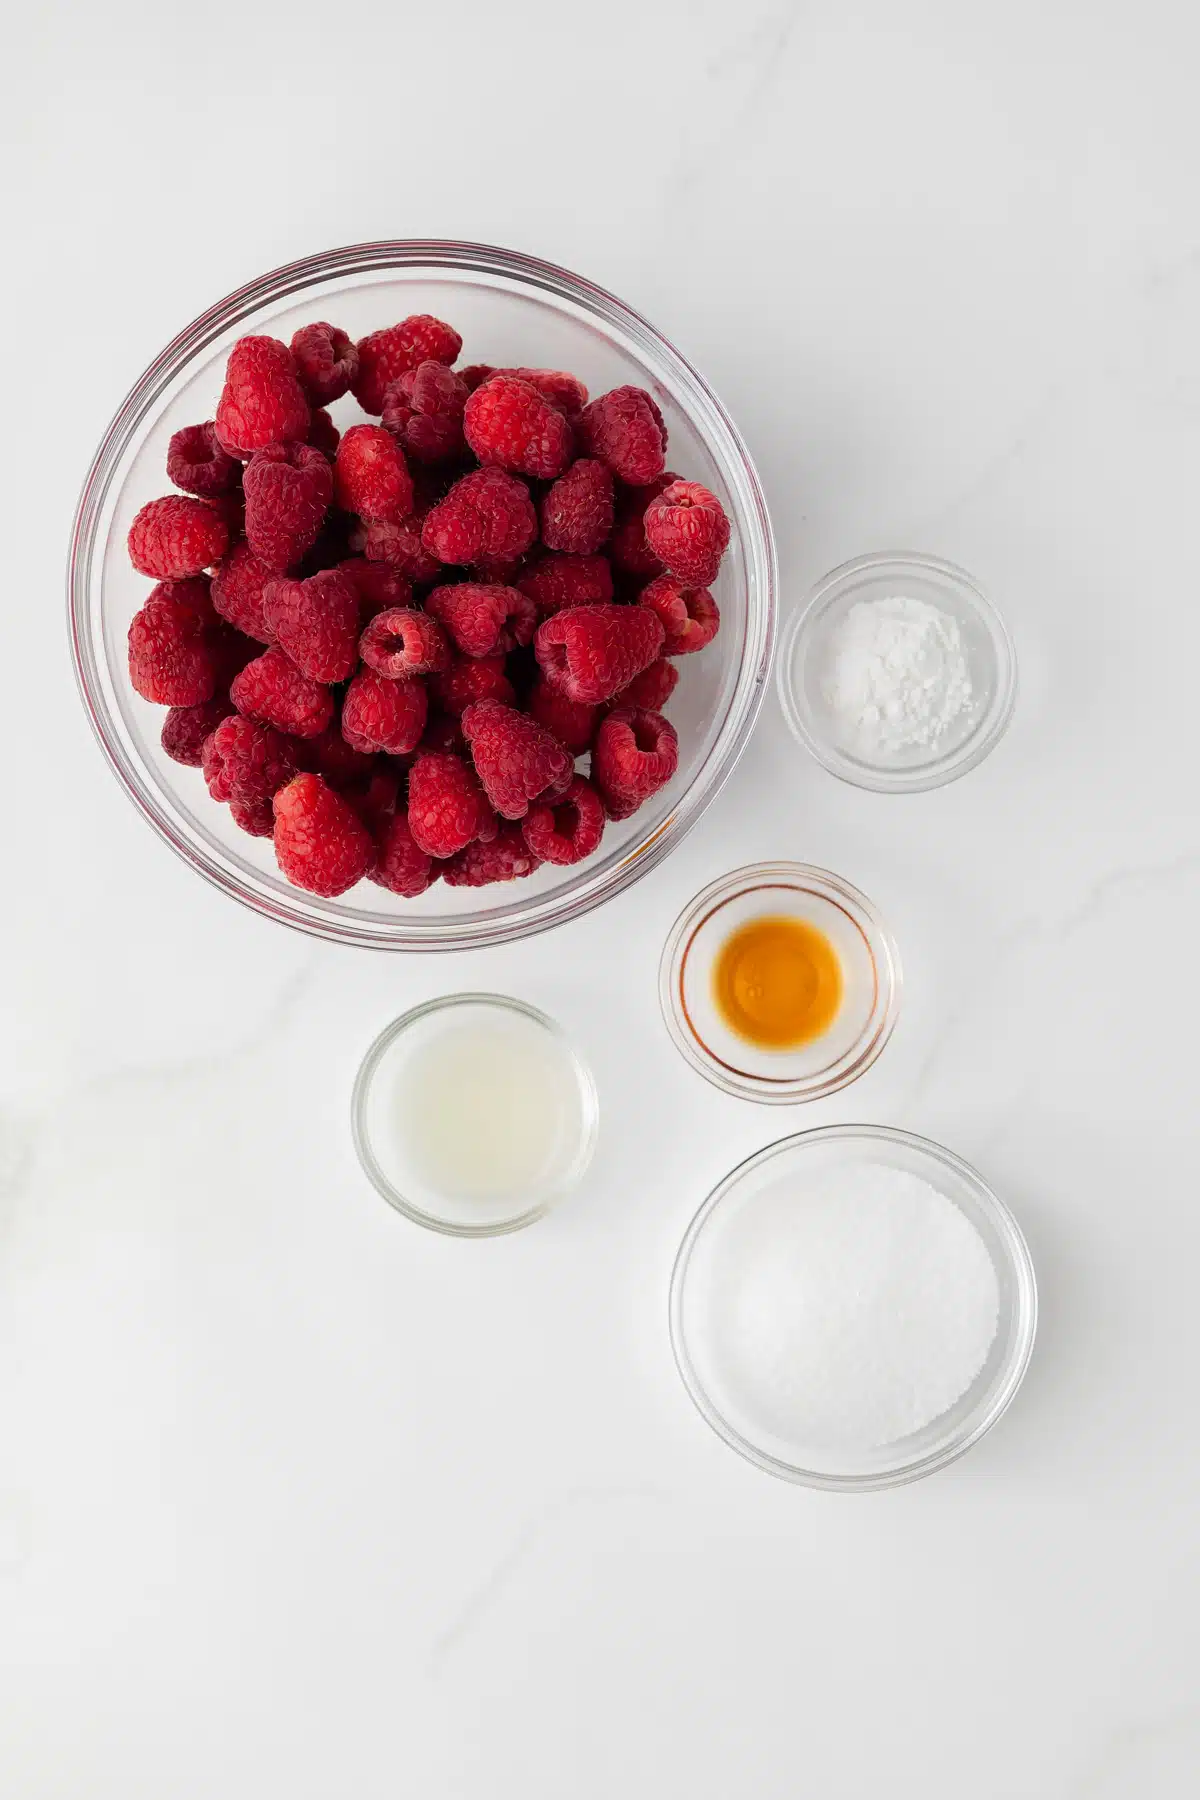 Ingredients for raspberry sauce.